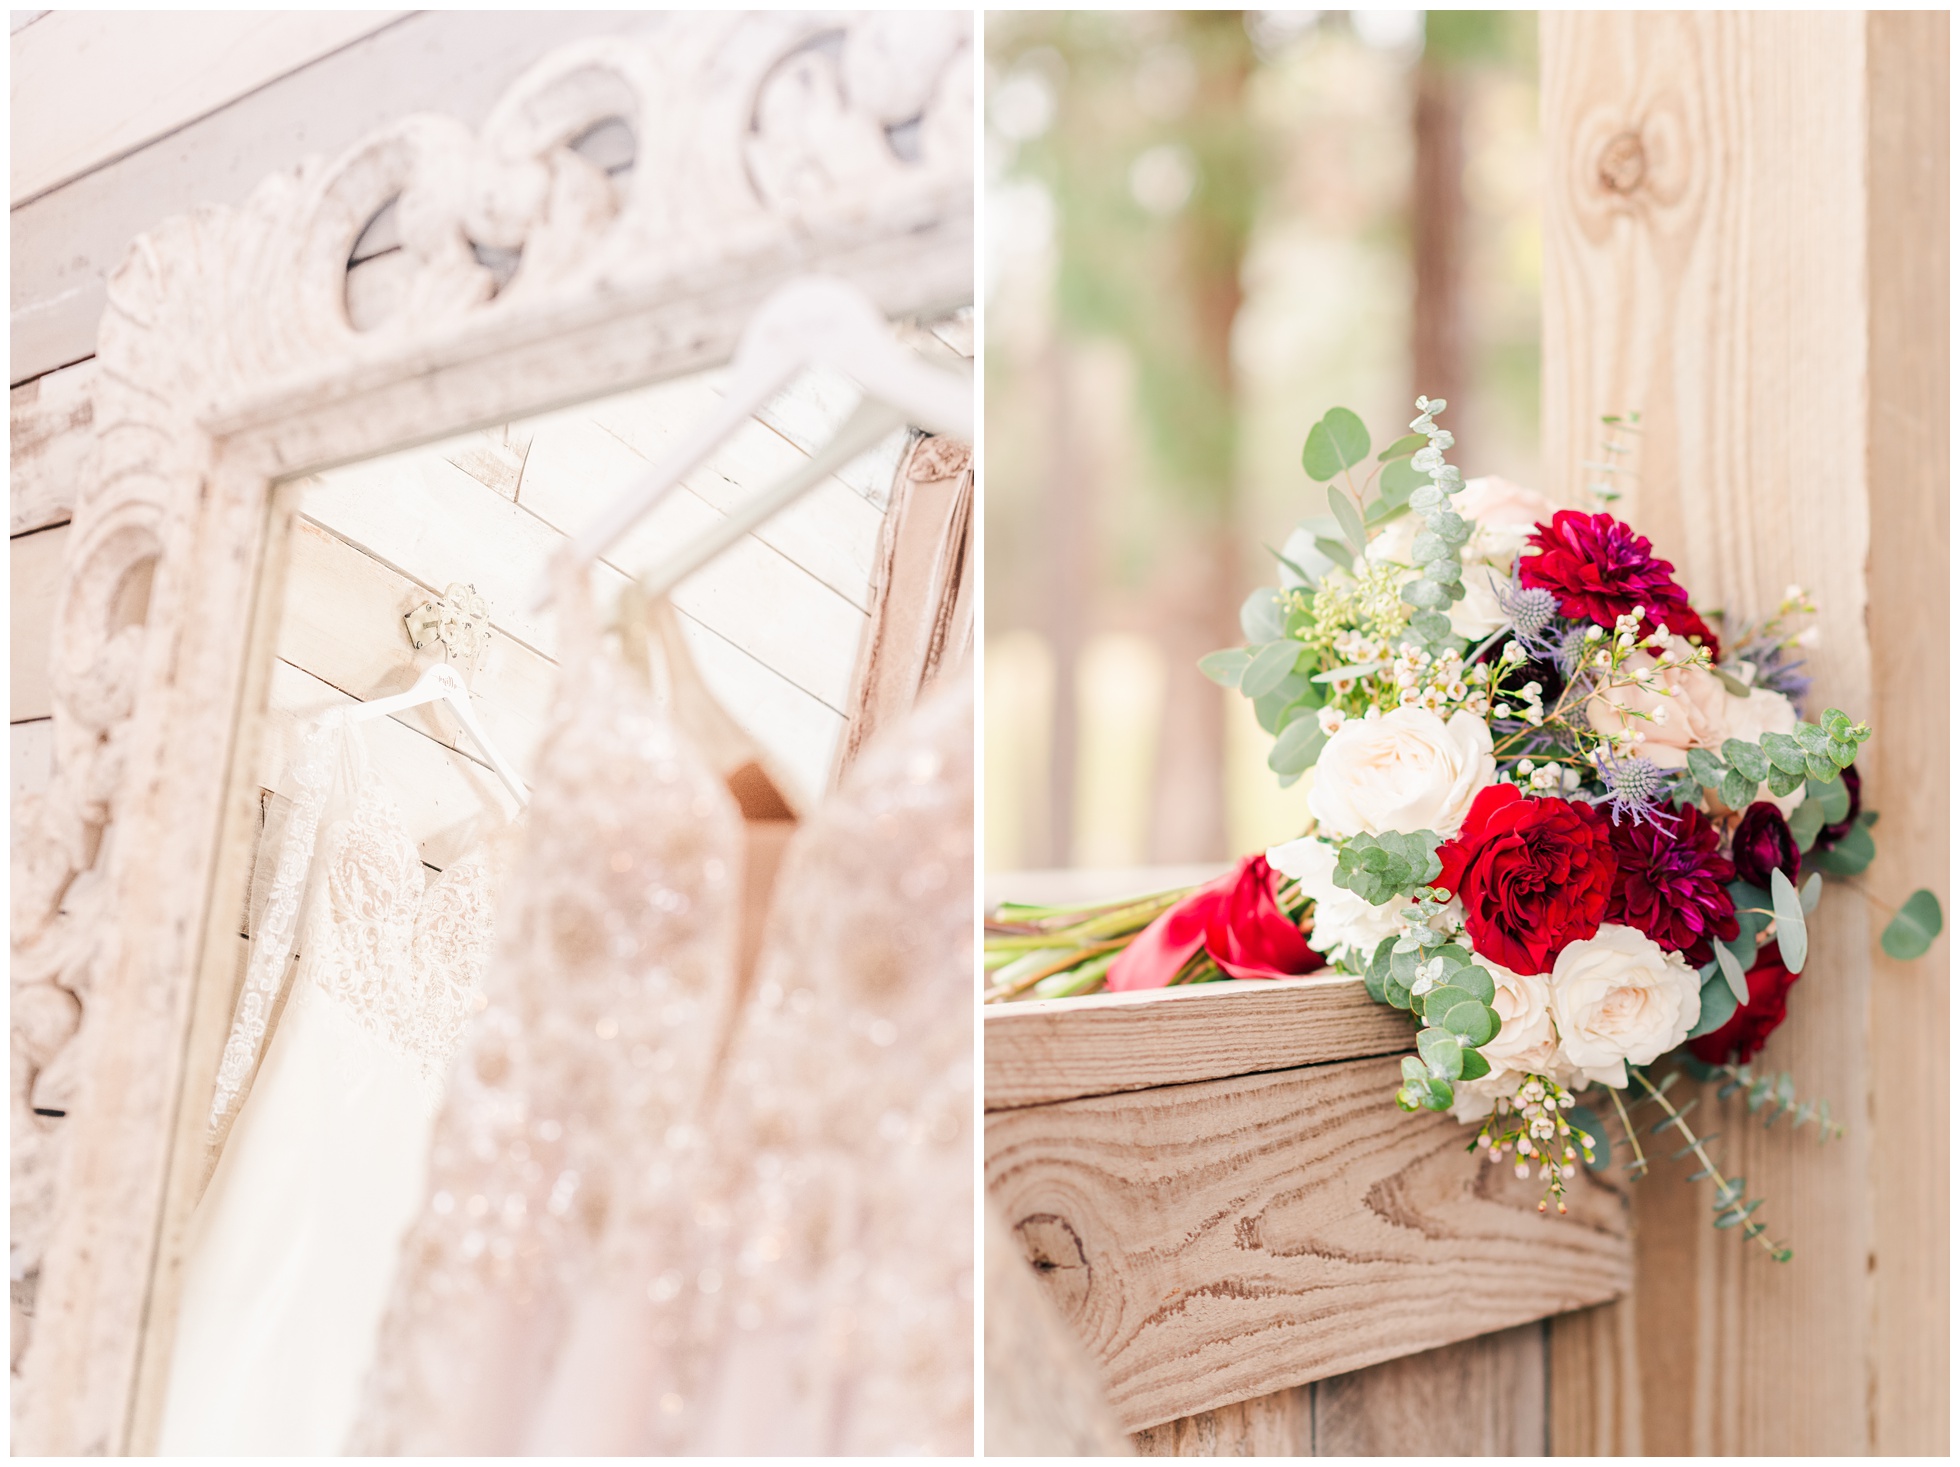 Bride's two dresses hanging and floral bouquet.